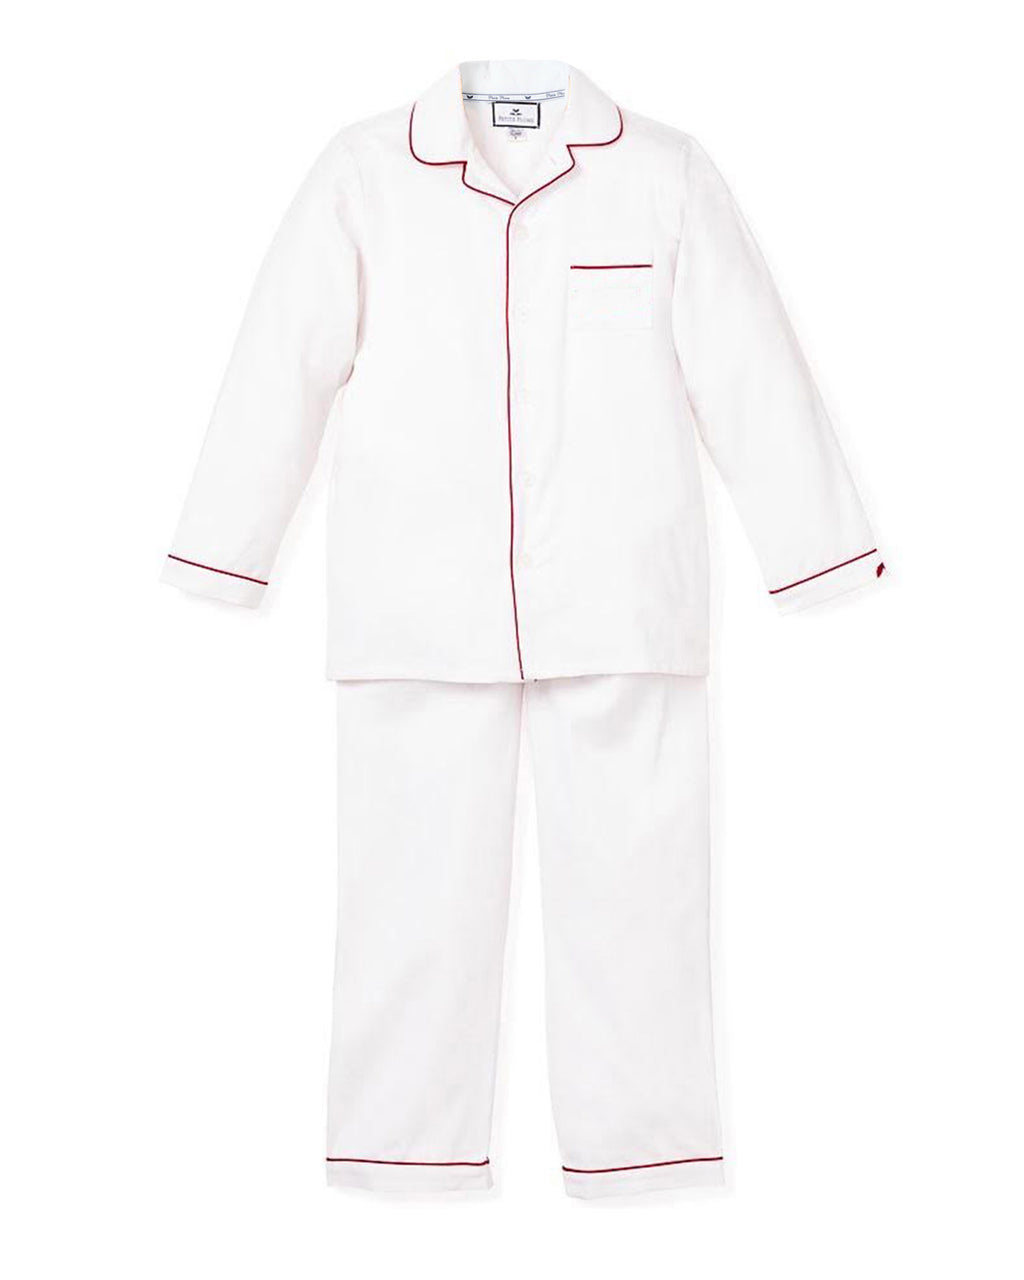 Children's Classic White Pajamas With Red Piping | Petite Plume